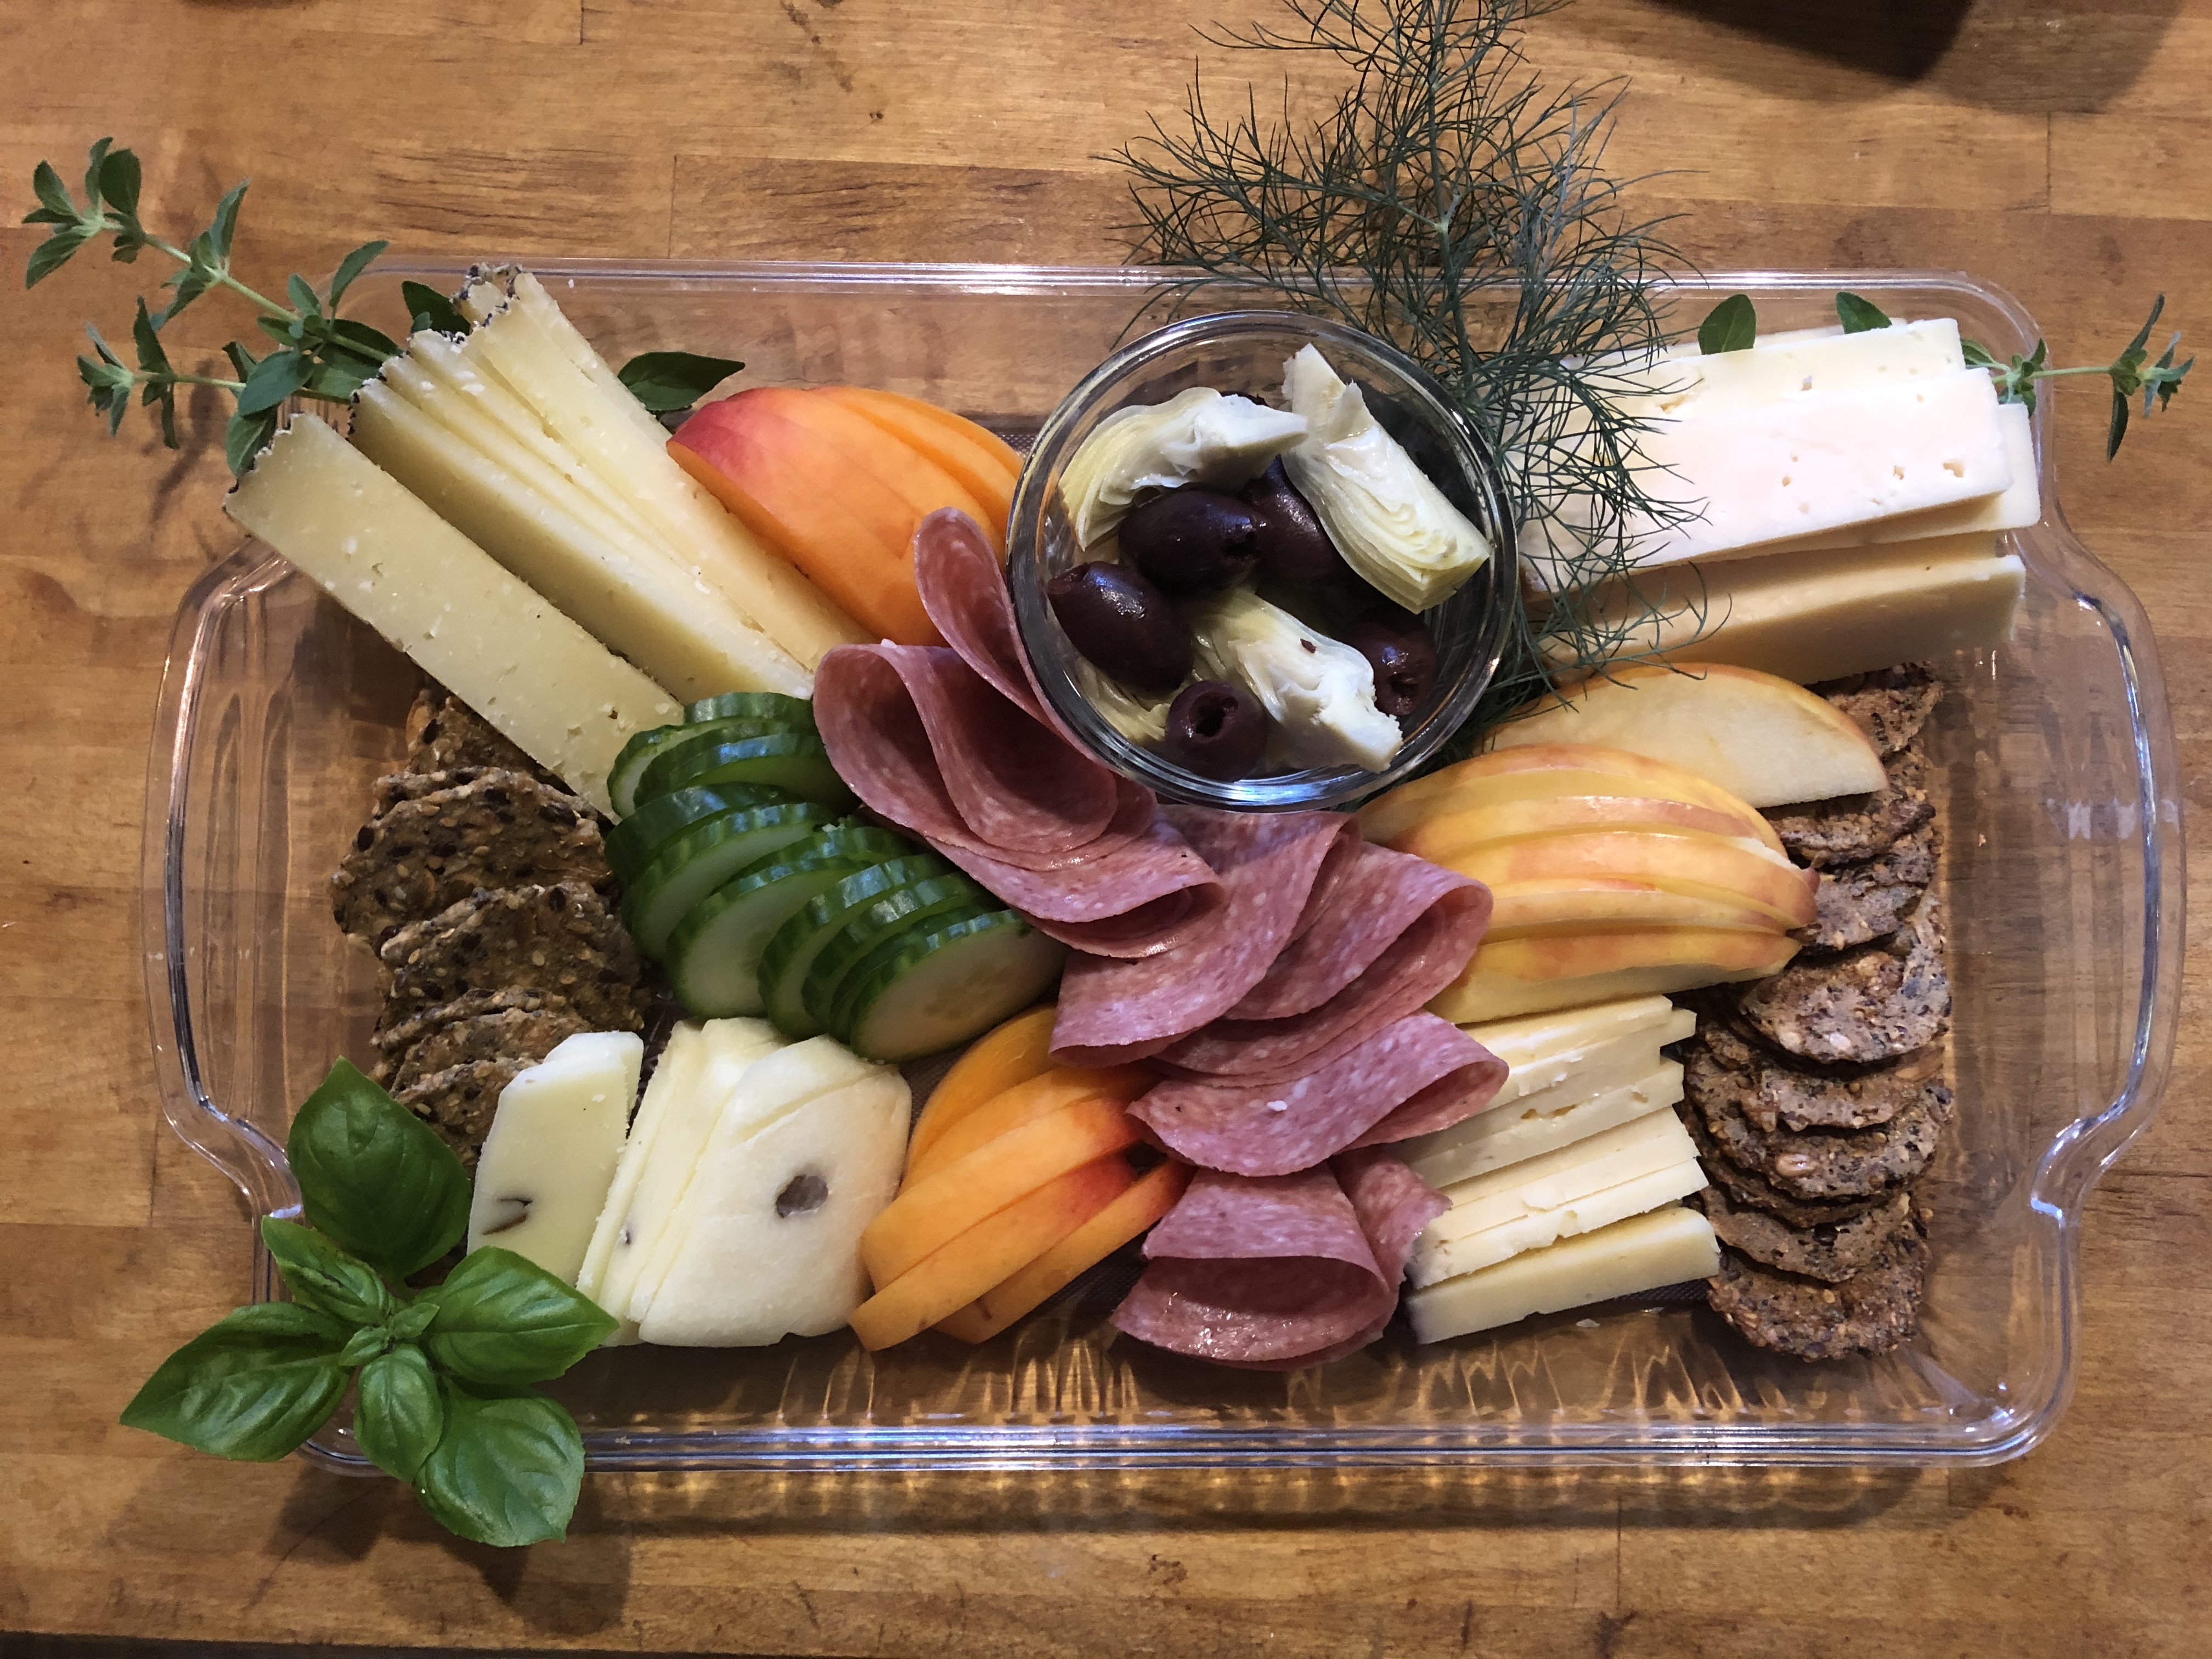 A cheese board on wood with crackers, cheeses, and herbs.